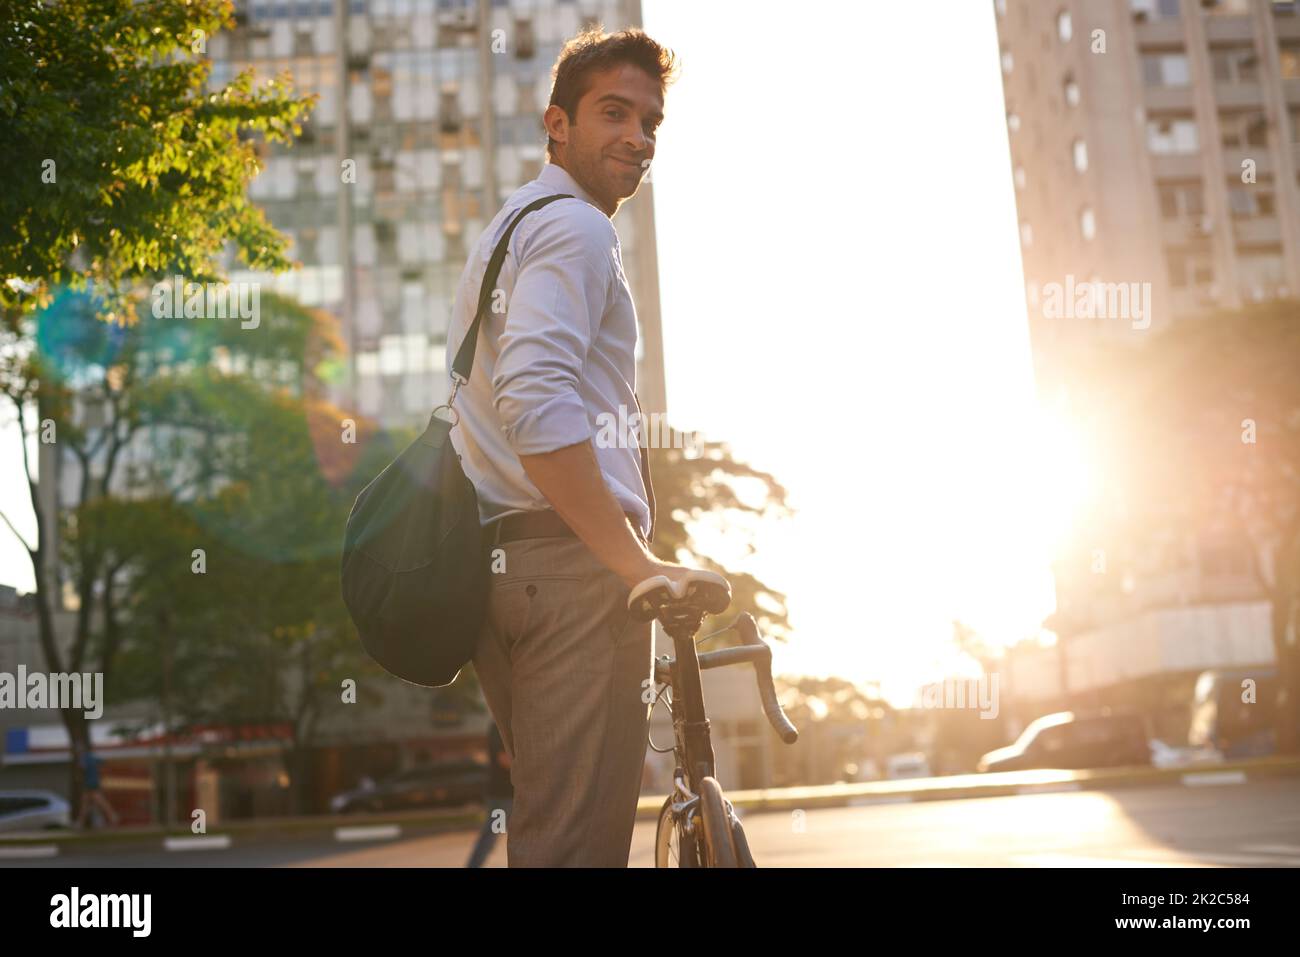 Take a bike. Shot of a businessman commuting to work with his bicycle. Stock Photo